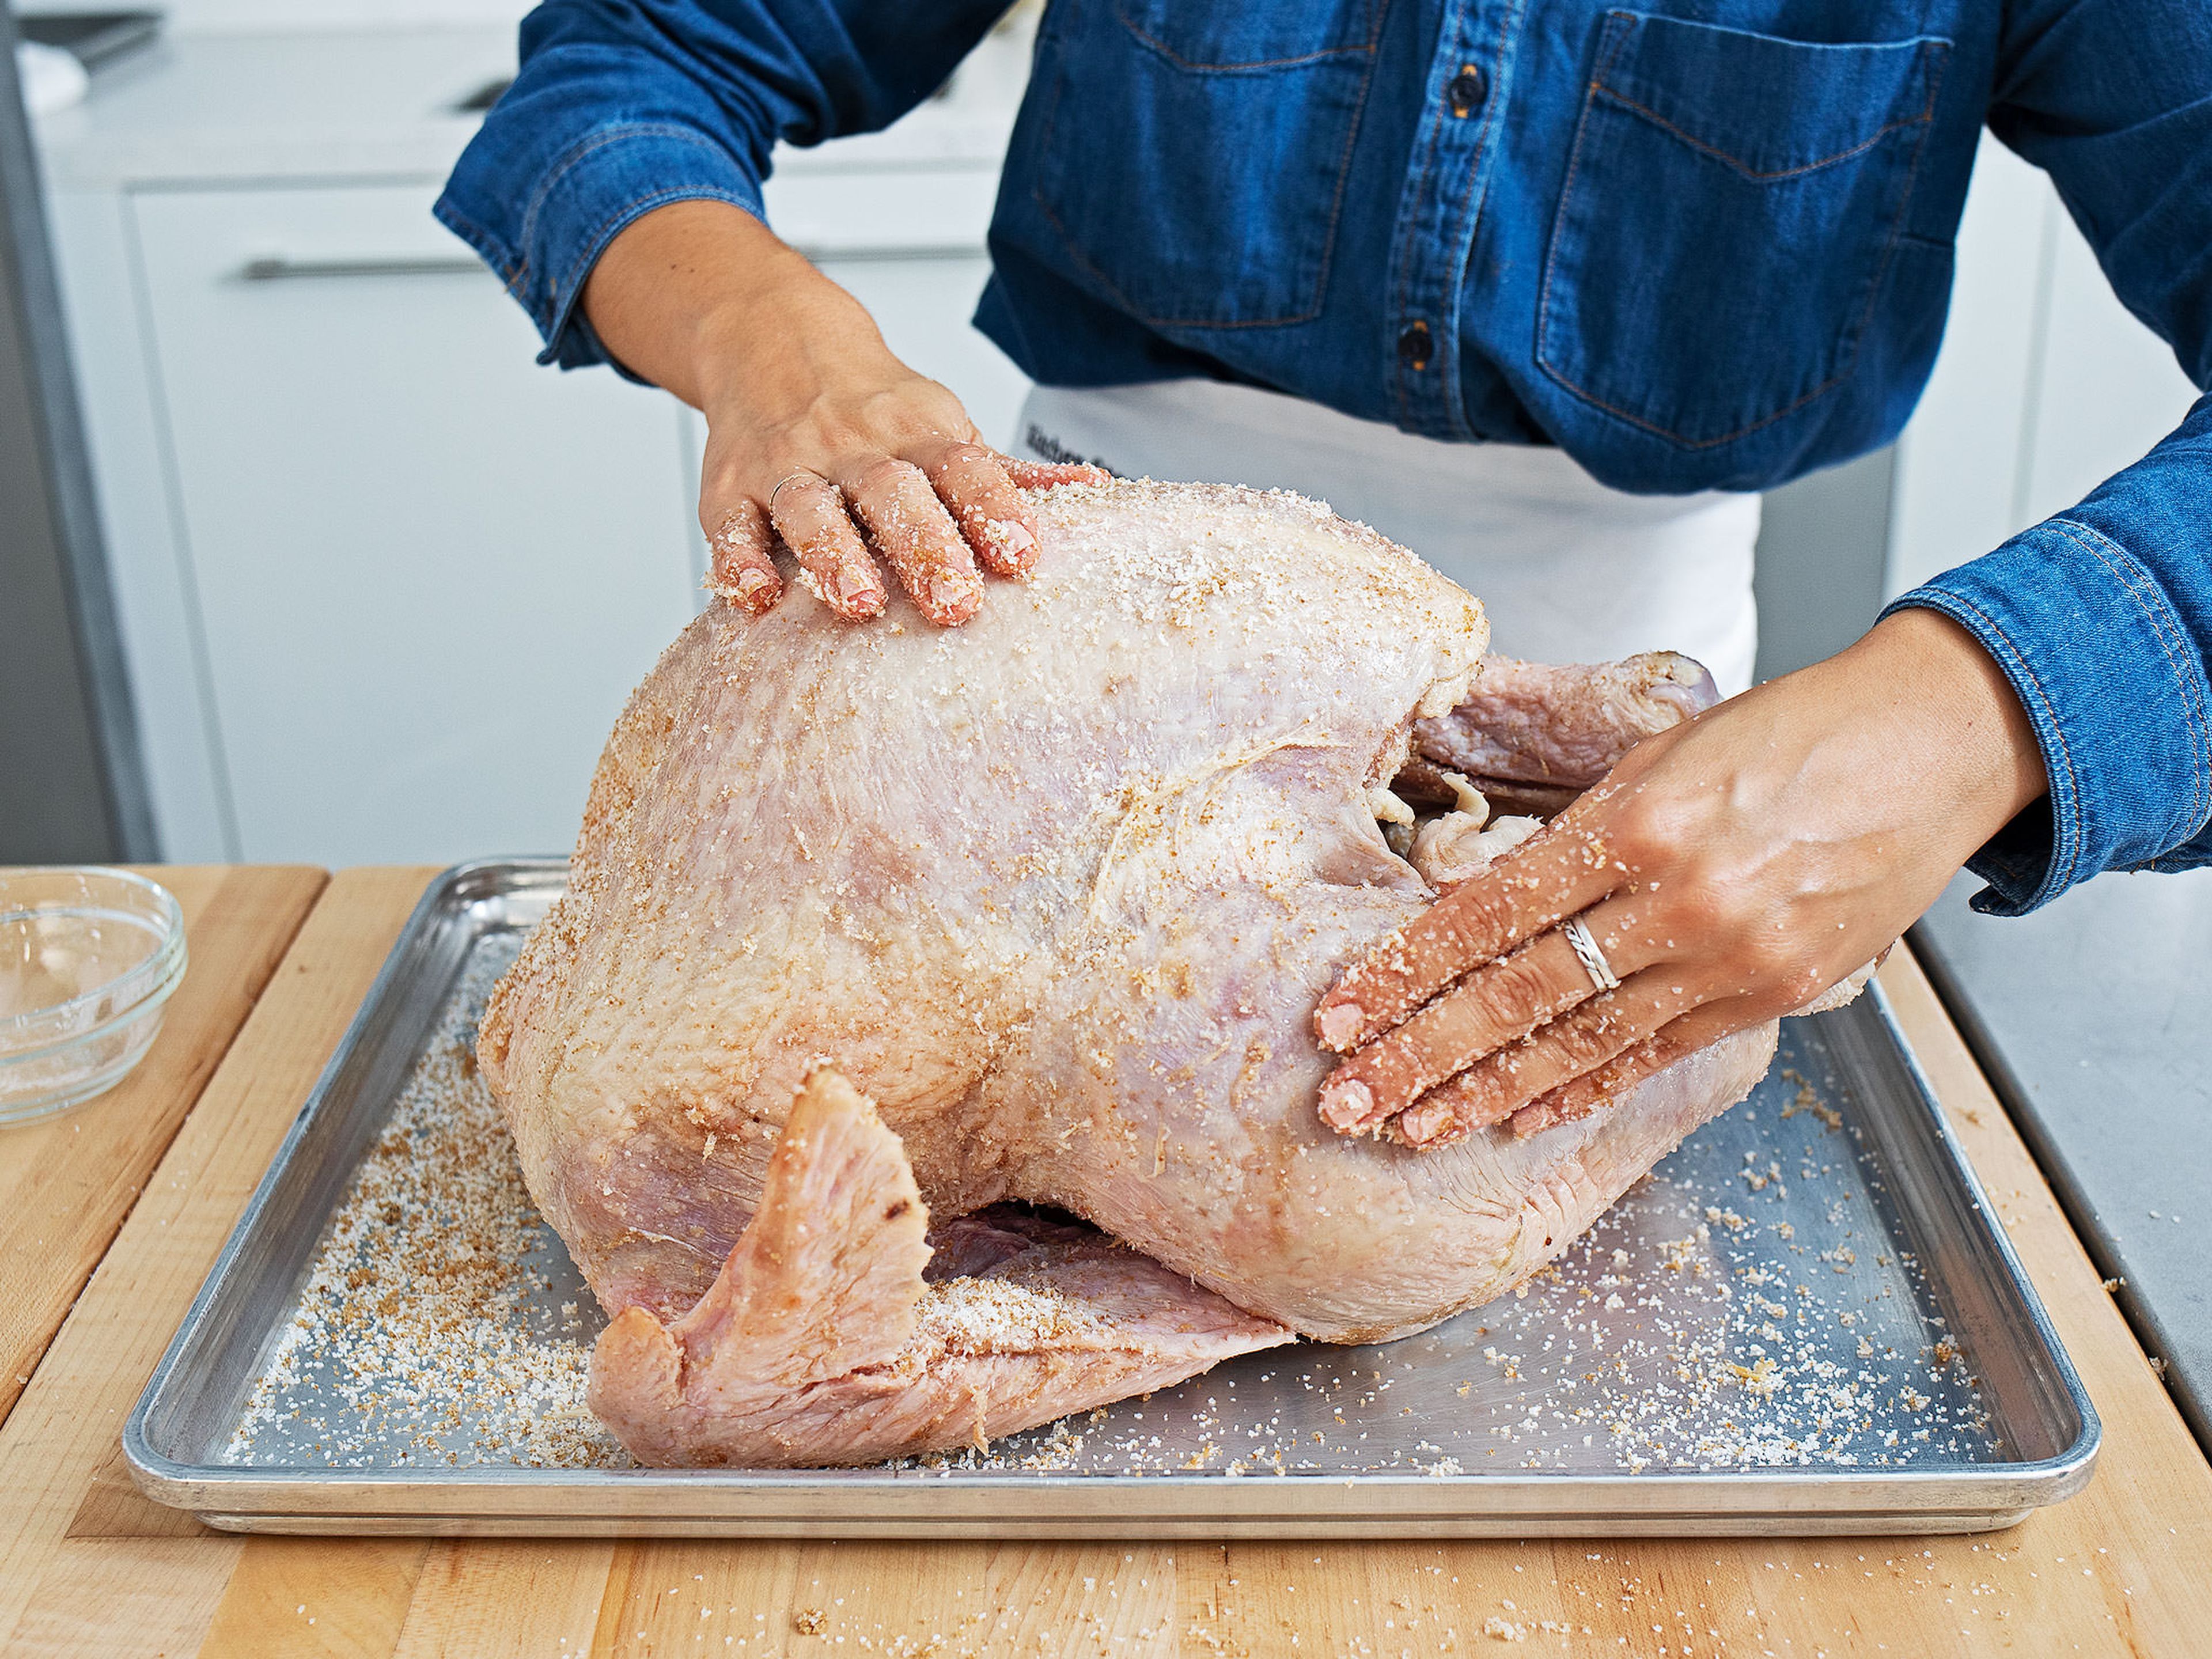 At least 1 day or up to 2 days before serving, brine the turkey. Combine the brown sugar and salt in a small bowl. Place the turkey on a baking sheet and pat dry. Coat thoroughly with the brining mixture. Transfer to the fridge to brine for least 1 or up to 2 days.